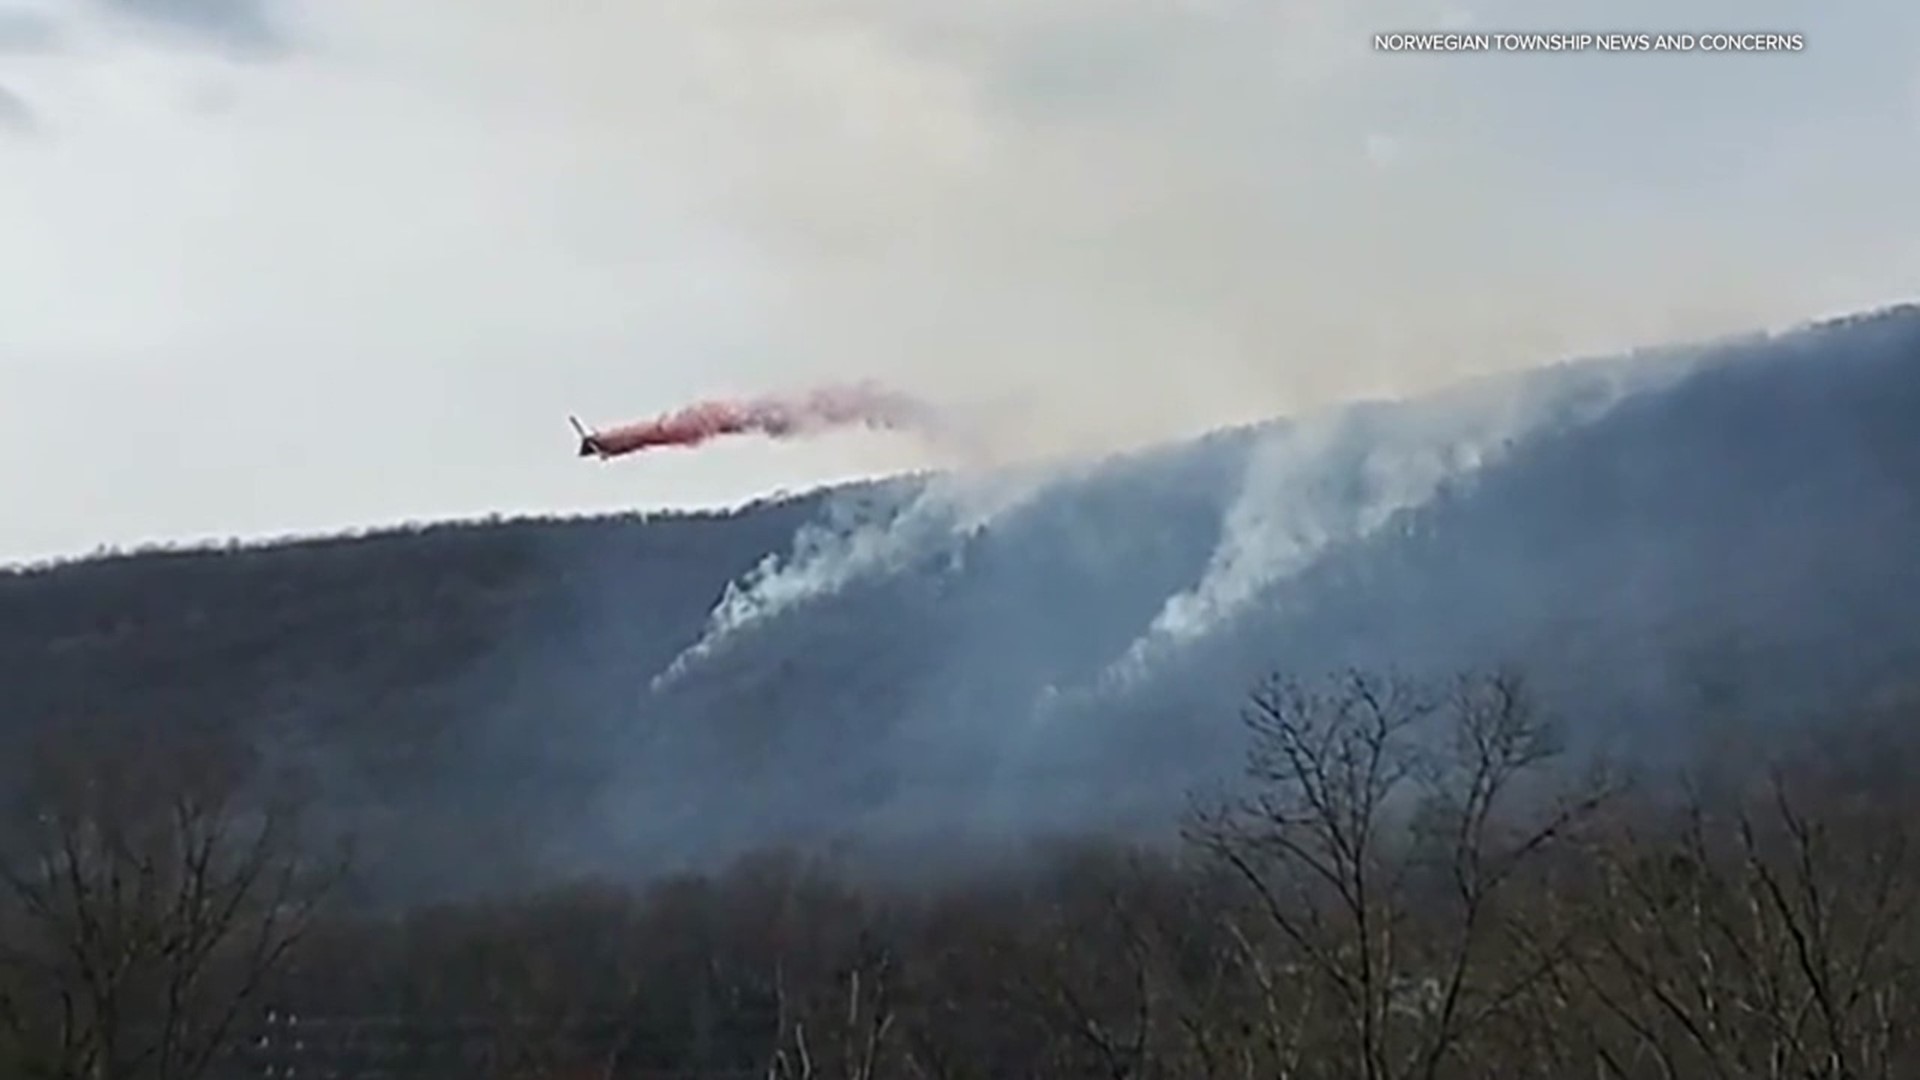 The mountain fire, in Northumberland County, was contained with a DCNR plane.